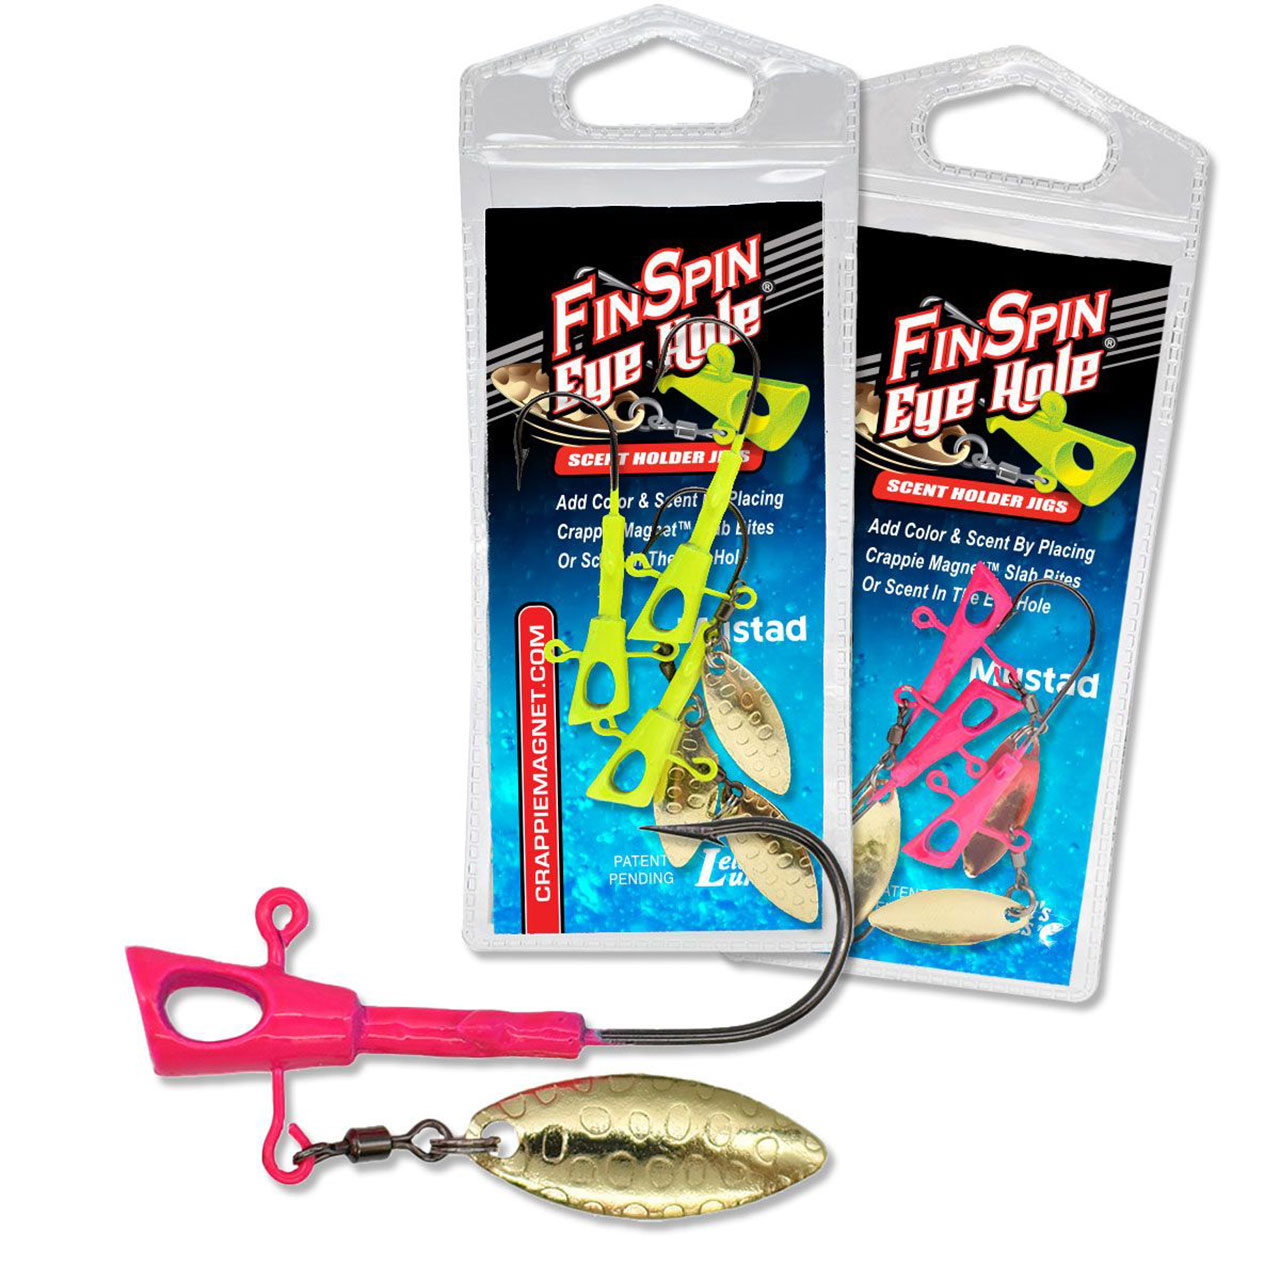 Fin Spin Crappie Jigversatile Chatterbait Fishing Lure For Bass & Pike -  Multi-position Wobbler